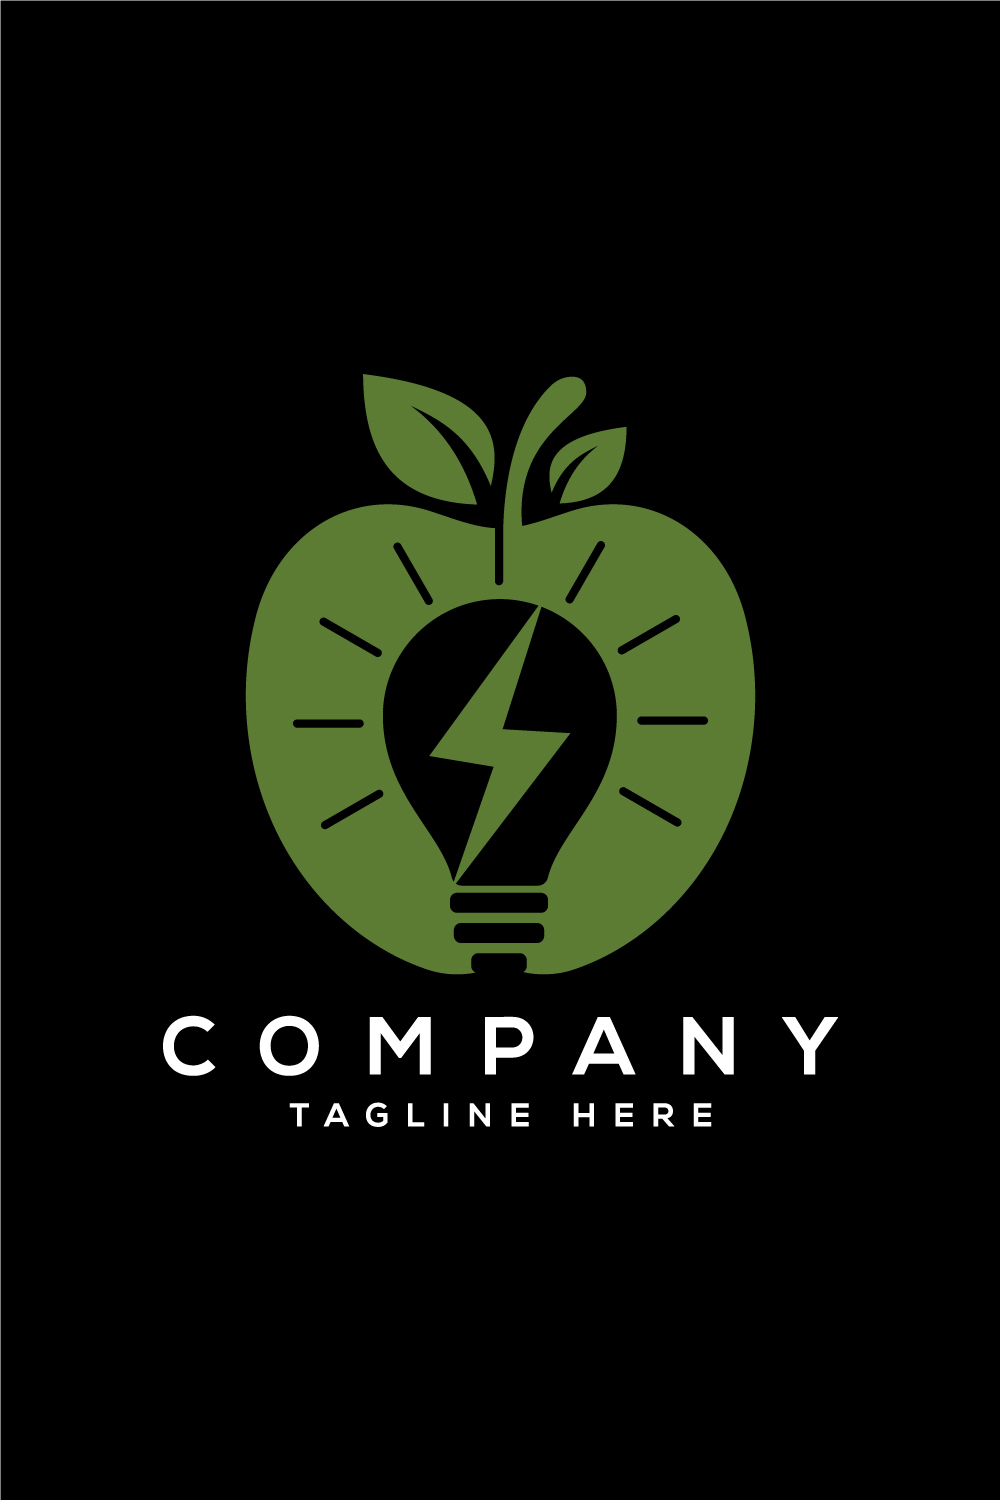 Apple and electricity logo sign symbol in flat style pinterest preview image.